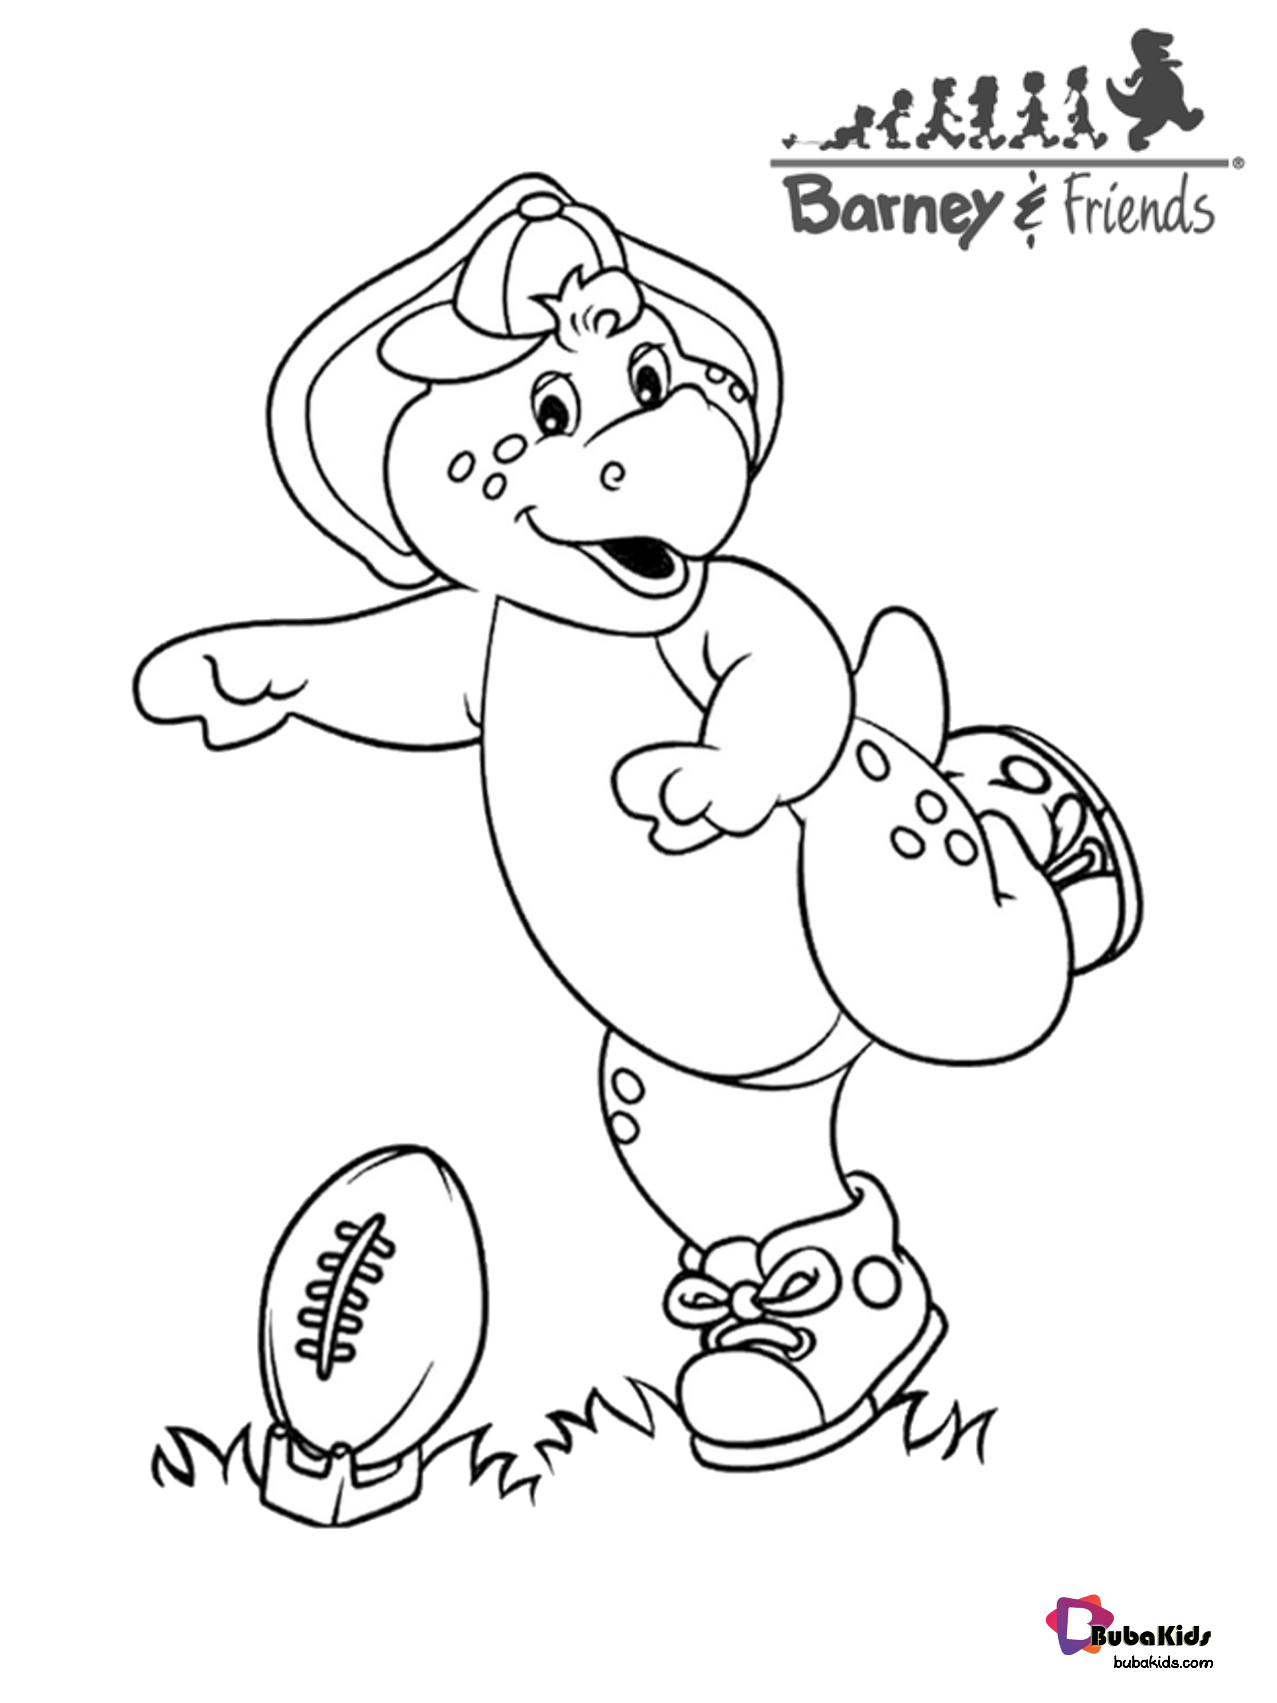 Free download and Printable Barney and friends coloring page. Wallpaper